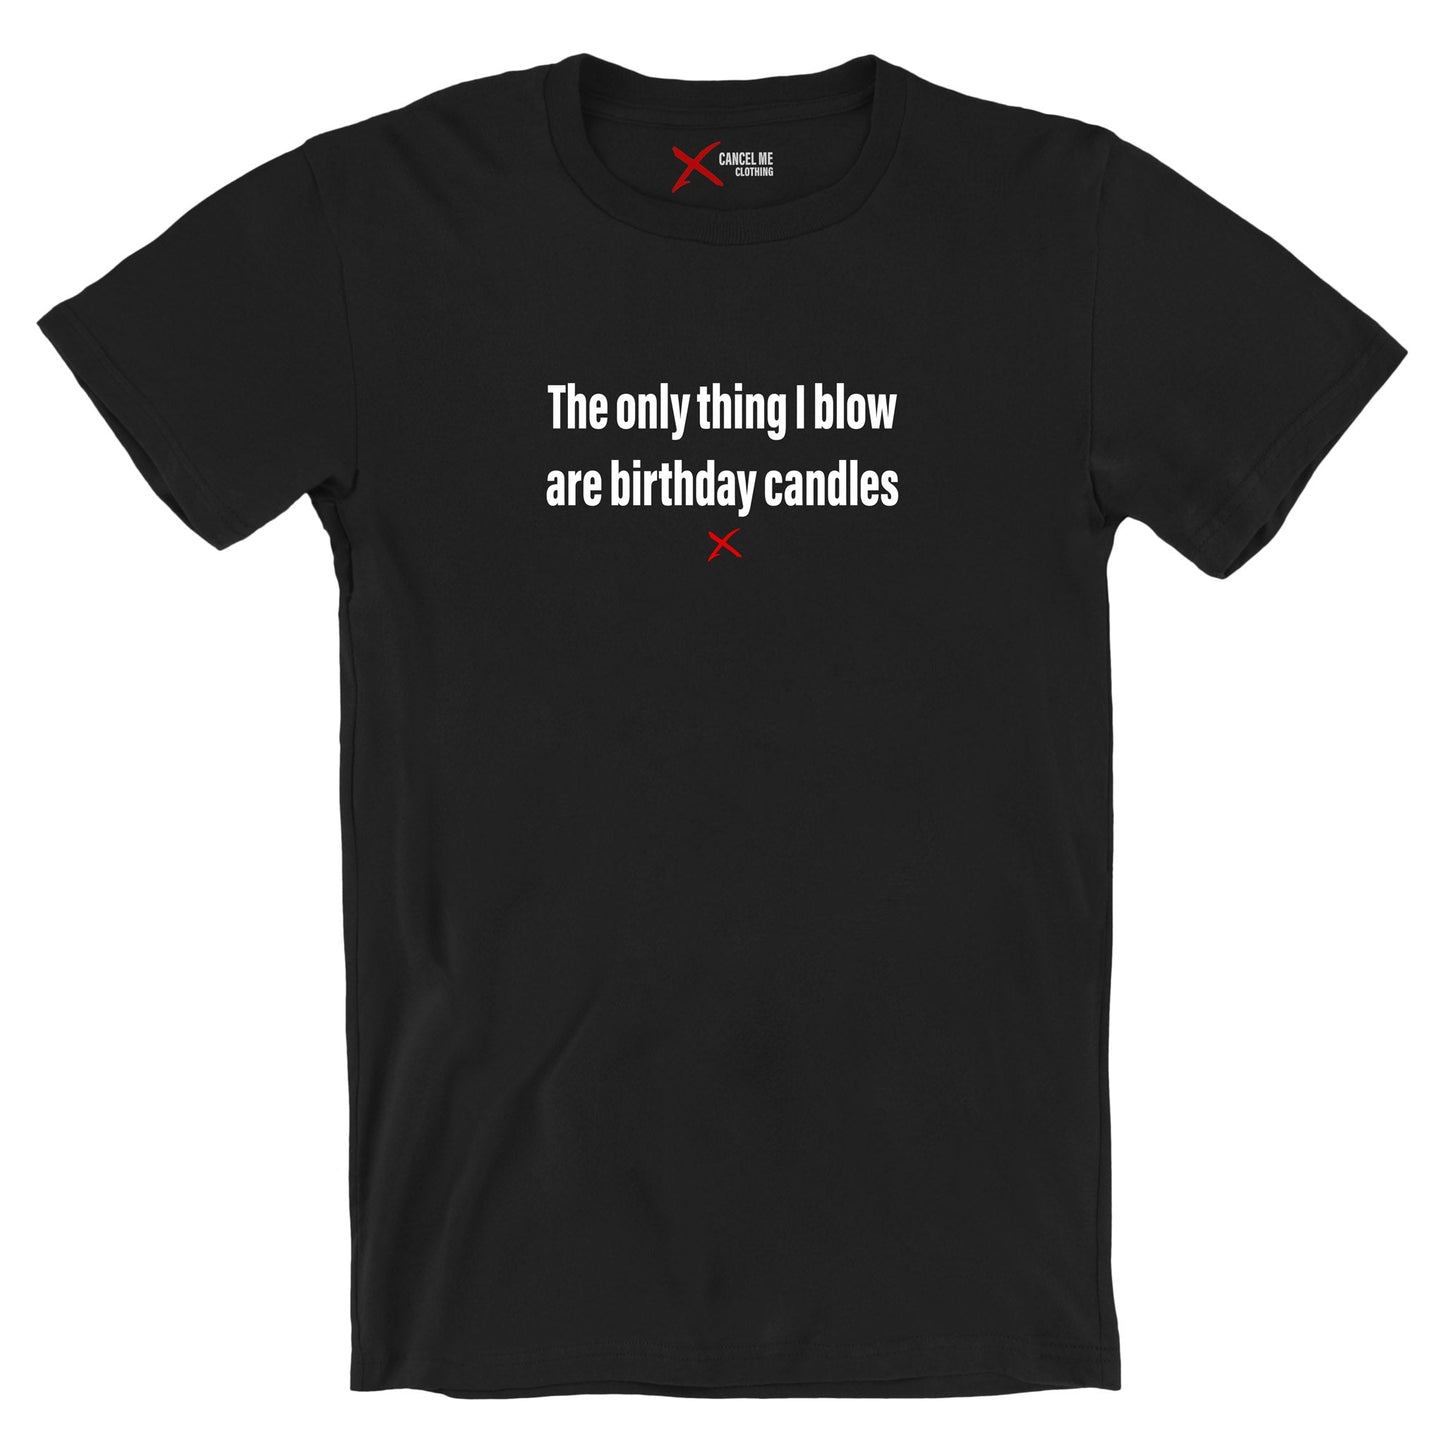 The only thing I blow are birthday candles - Shirt